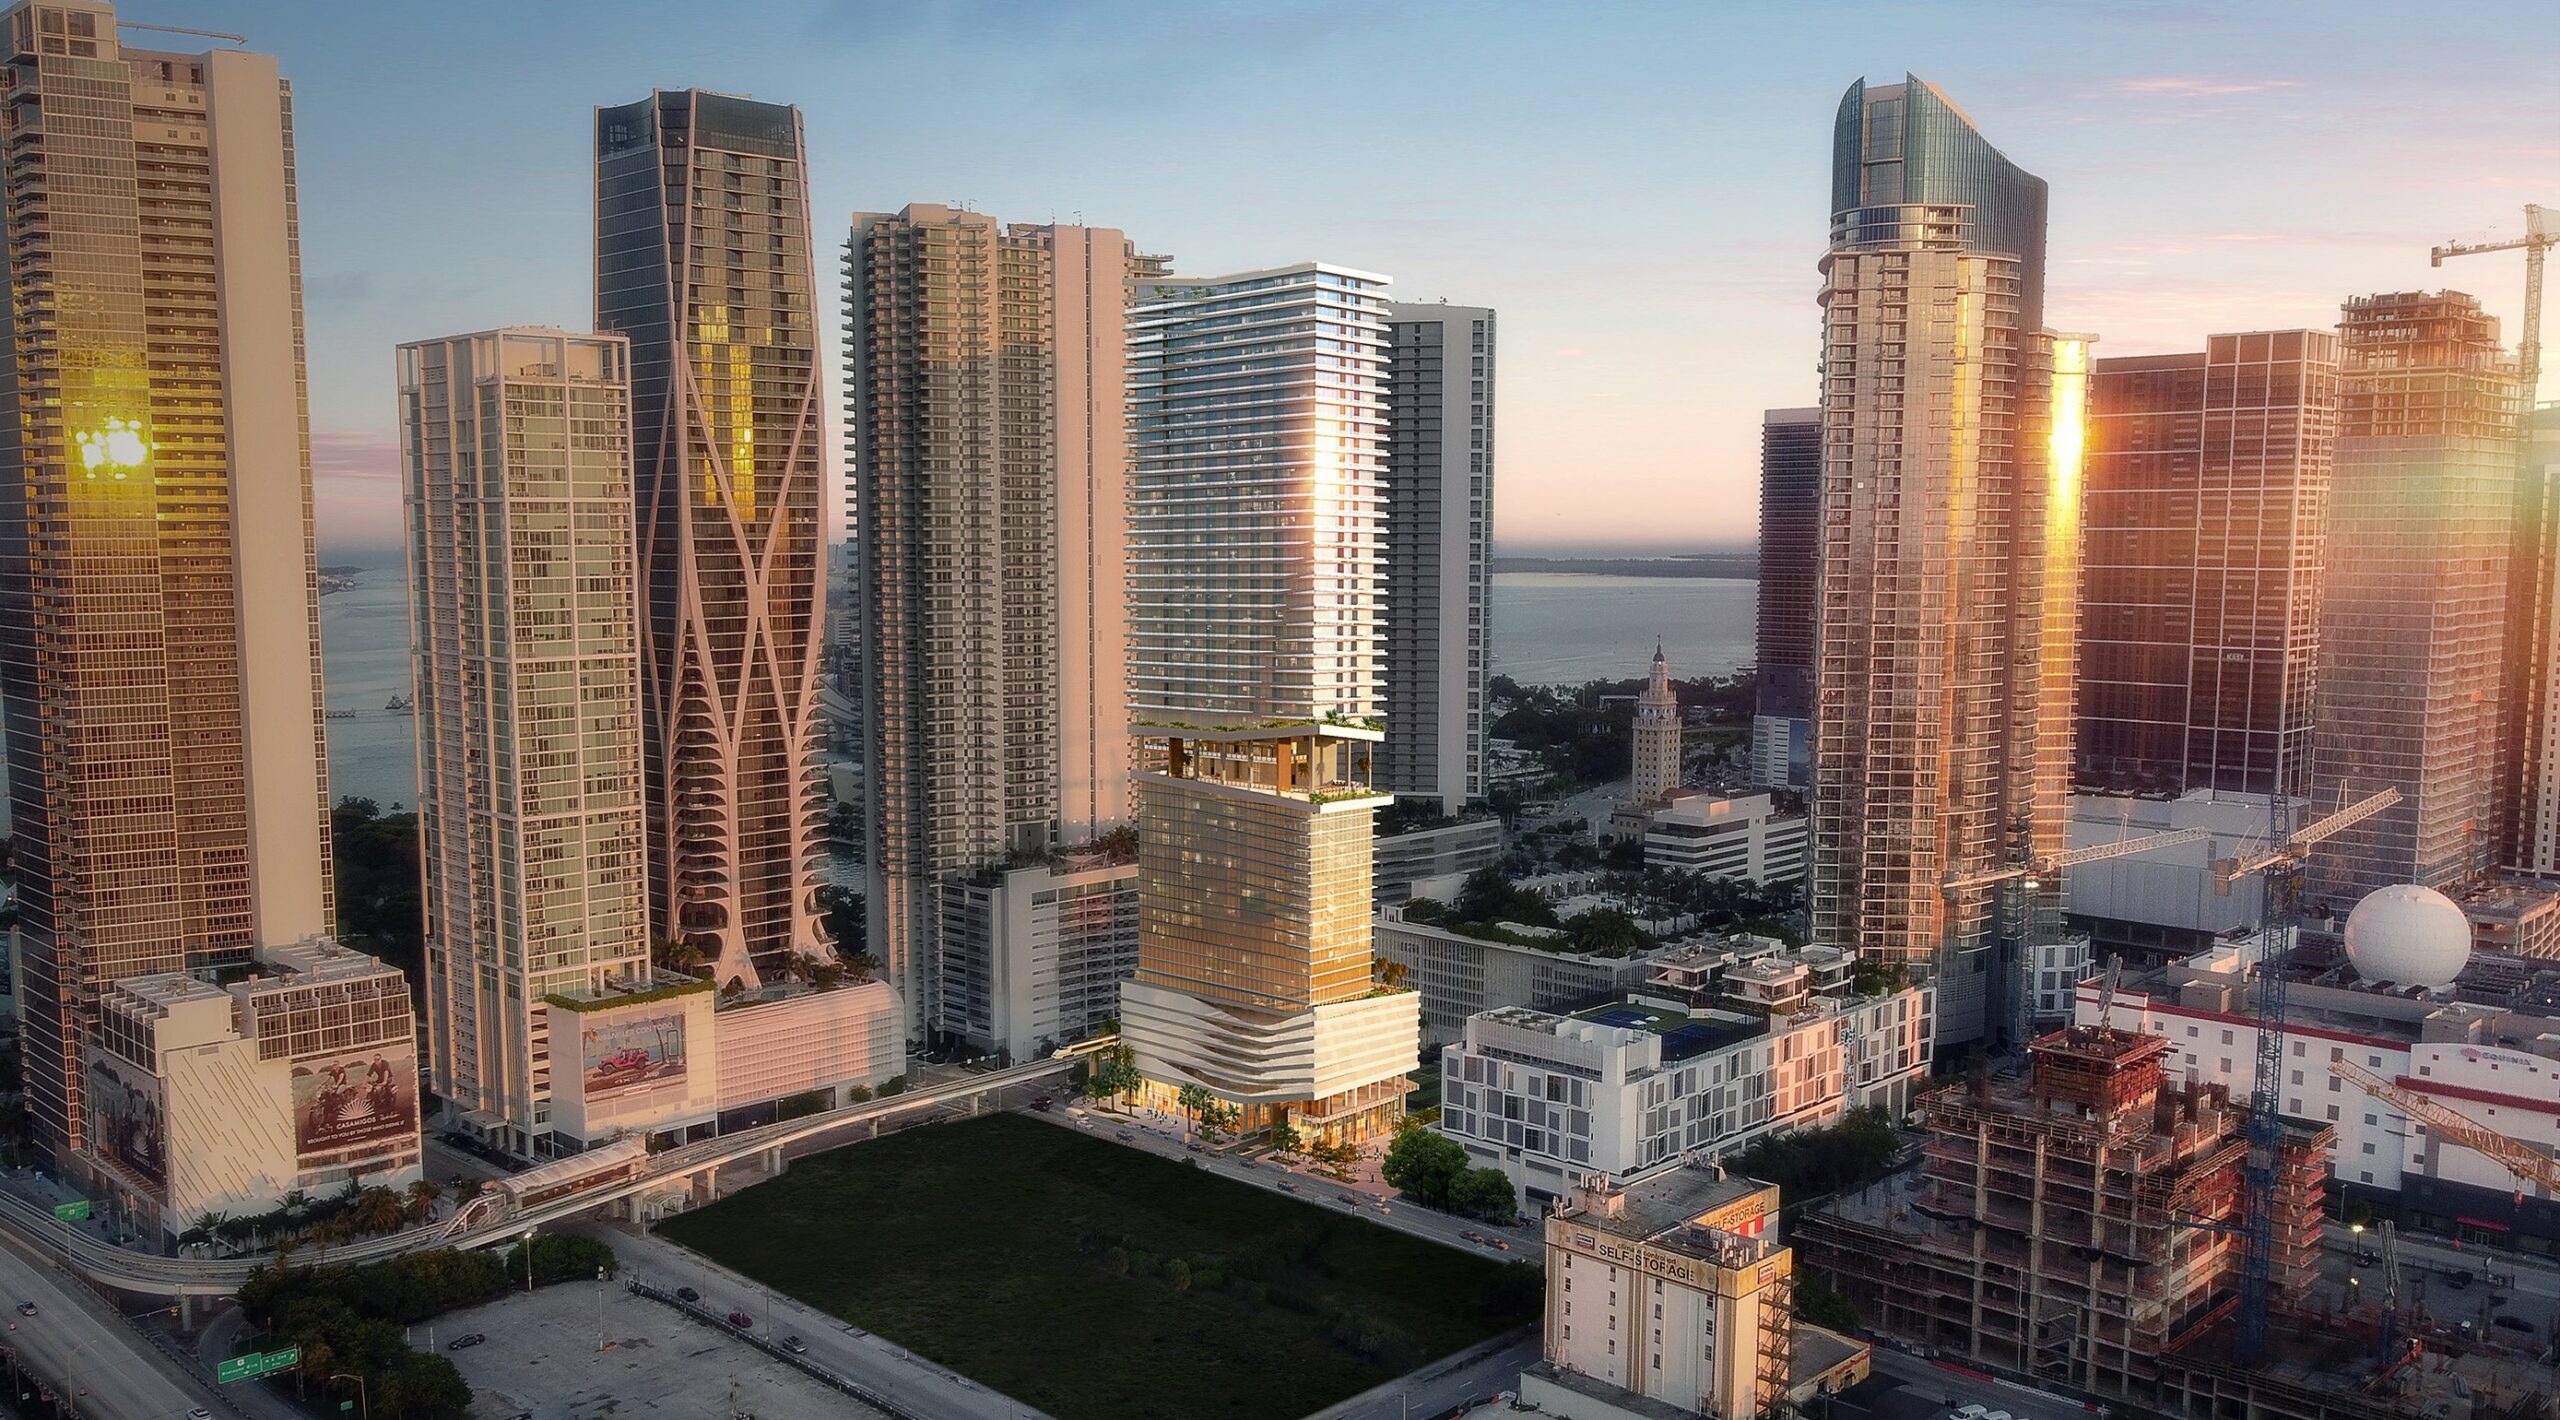 Miami Worldcenter Block C by Nichols Architects. Rendering by Lifang